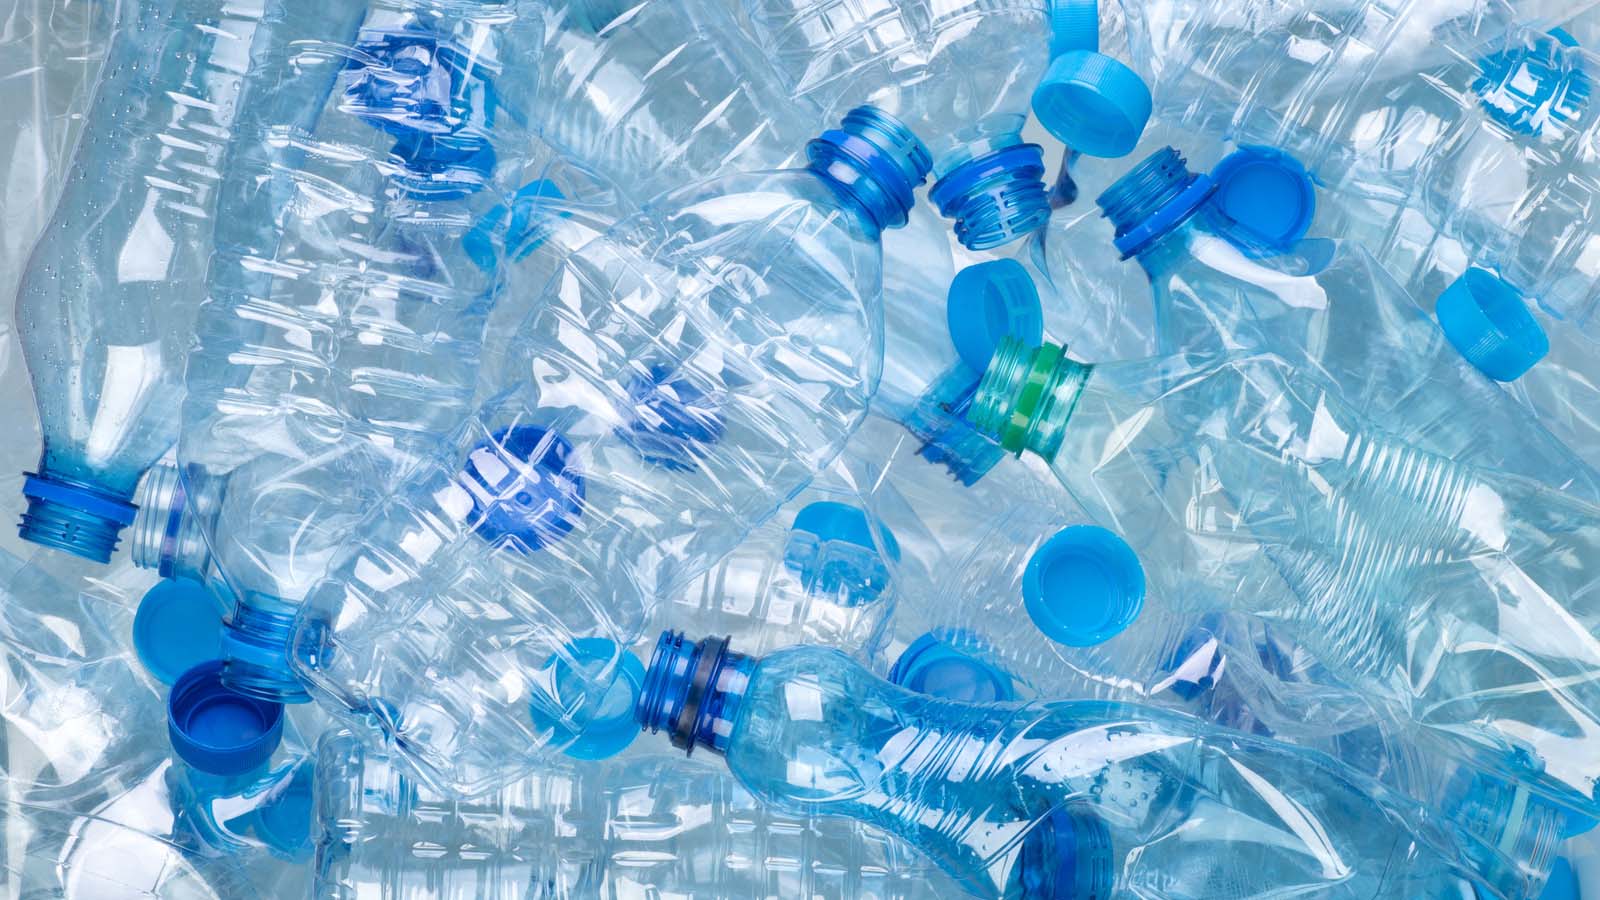 Why we should not reuse plastic water bottles